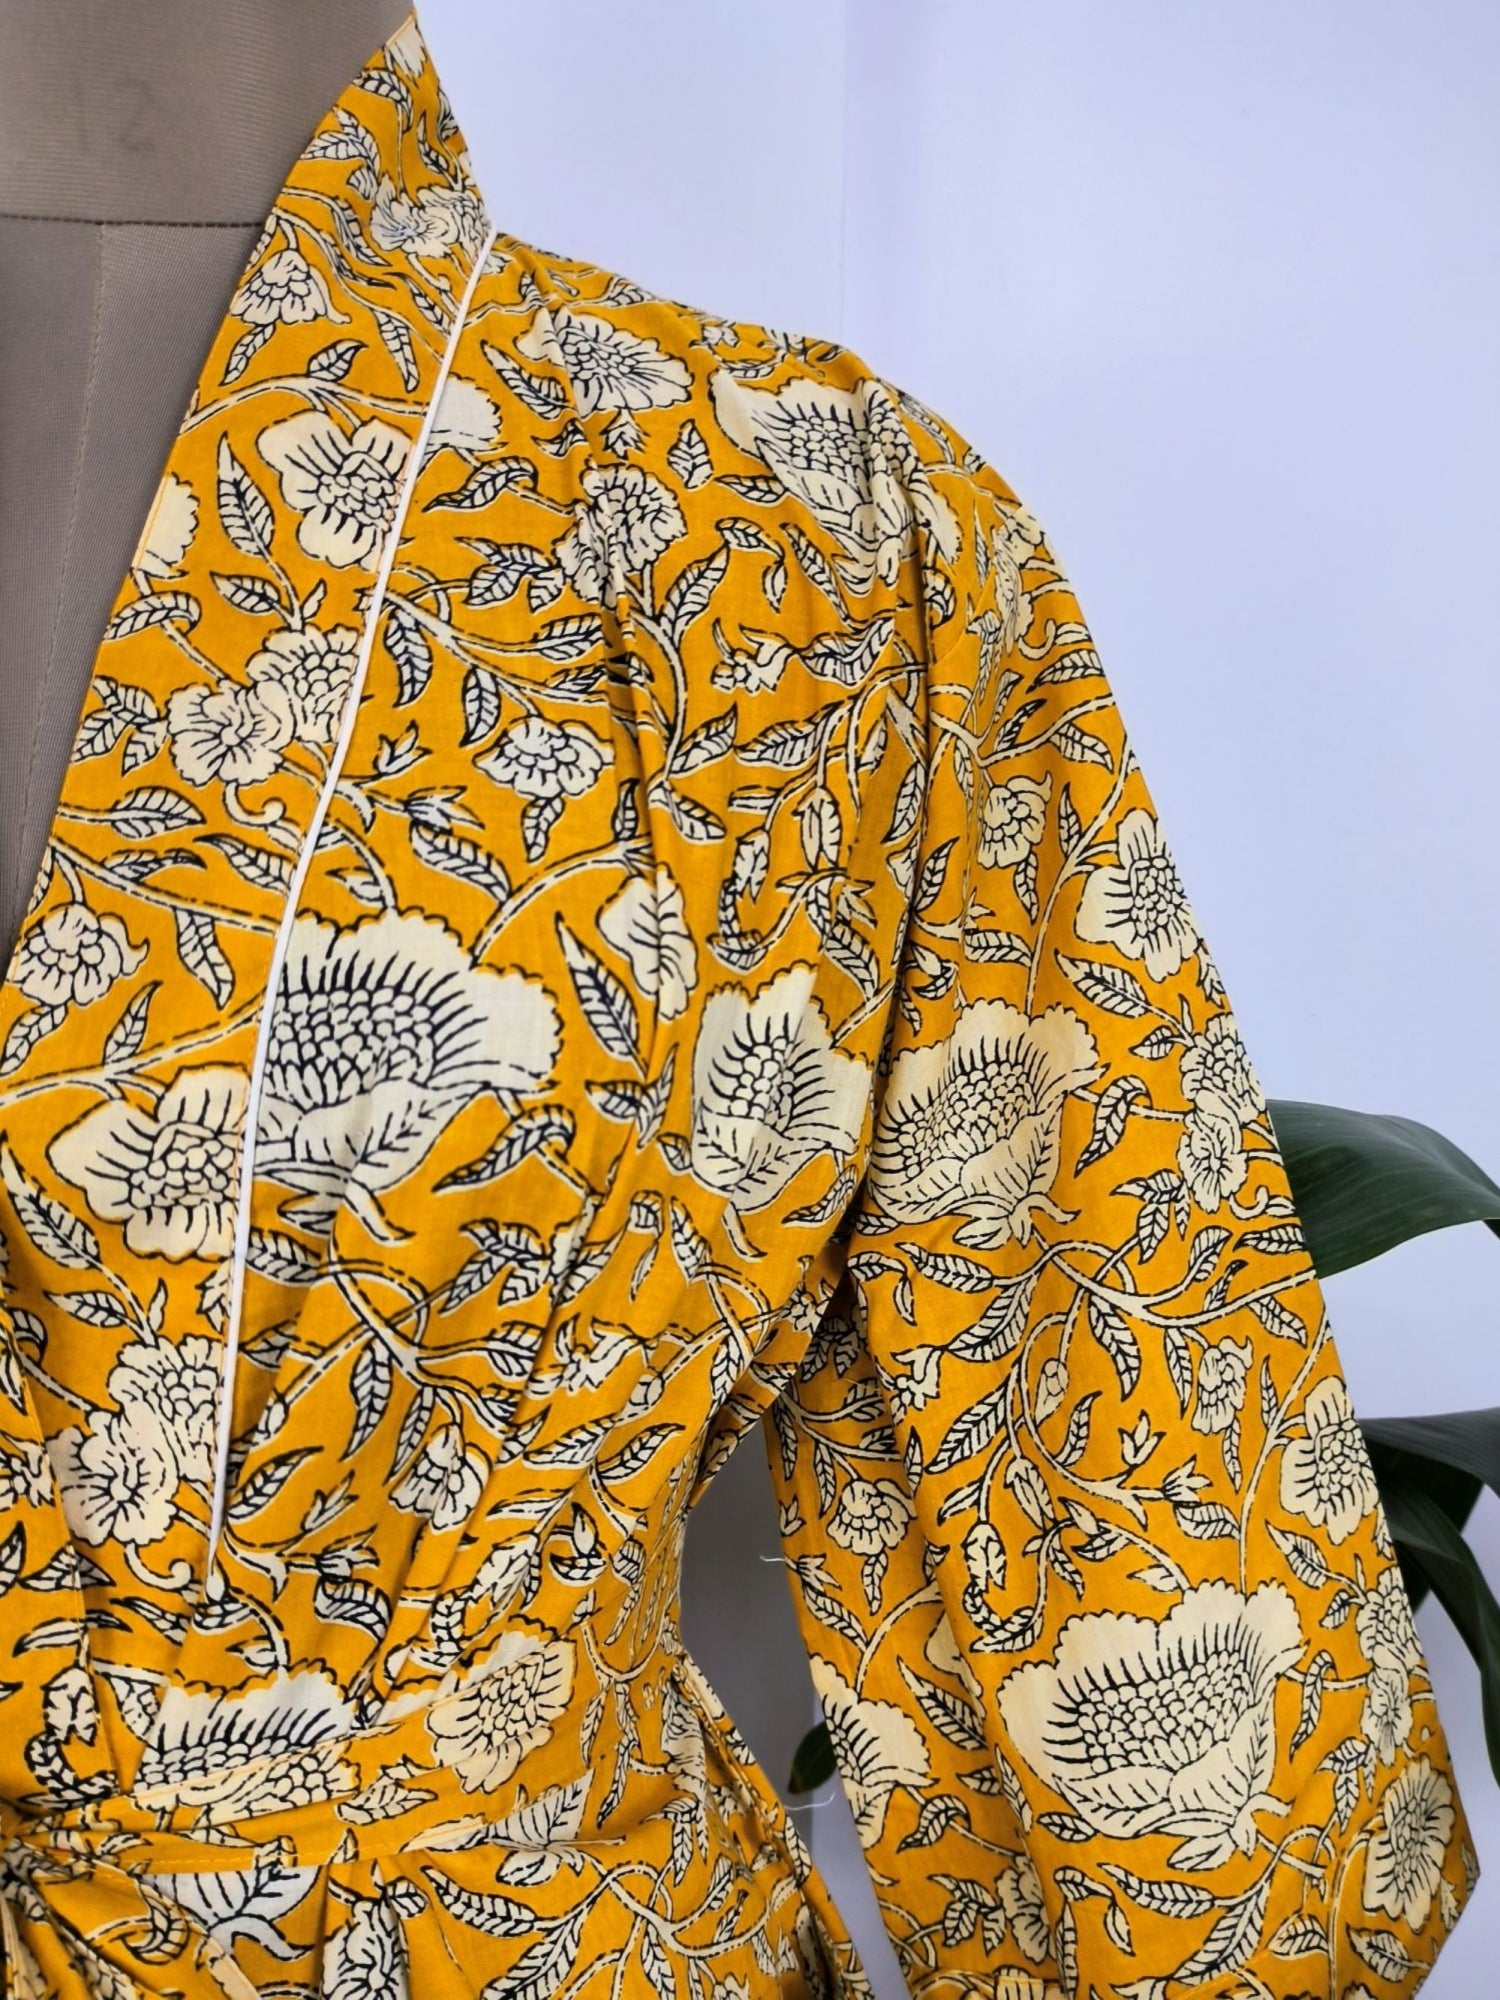 House Robe Summer Kimono Pure Cotton Indian Block Printed For Her | Anniversary Gift Beach Coverup/Comfy Maternity Mom | Mustard Floral